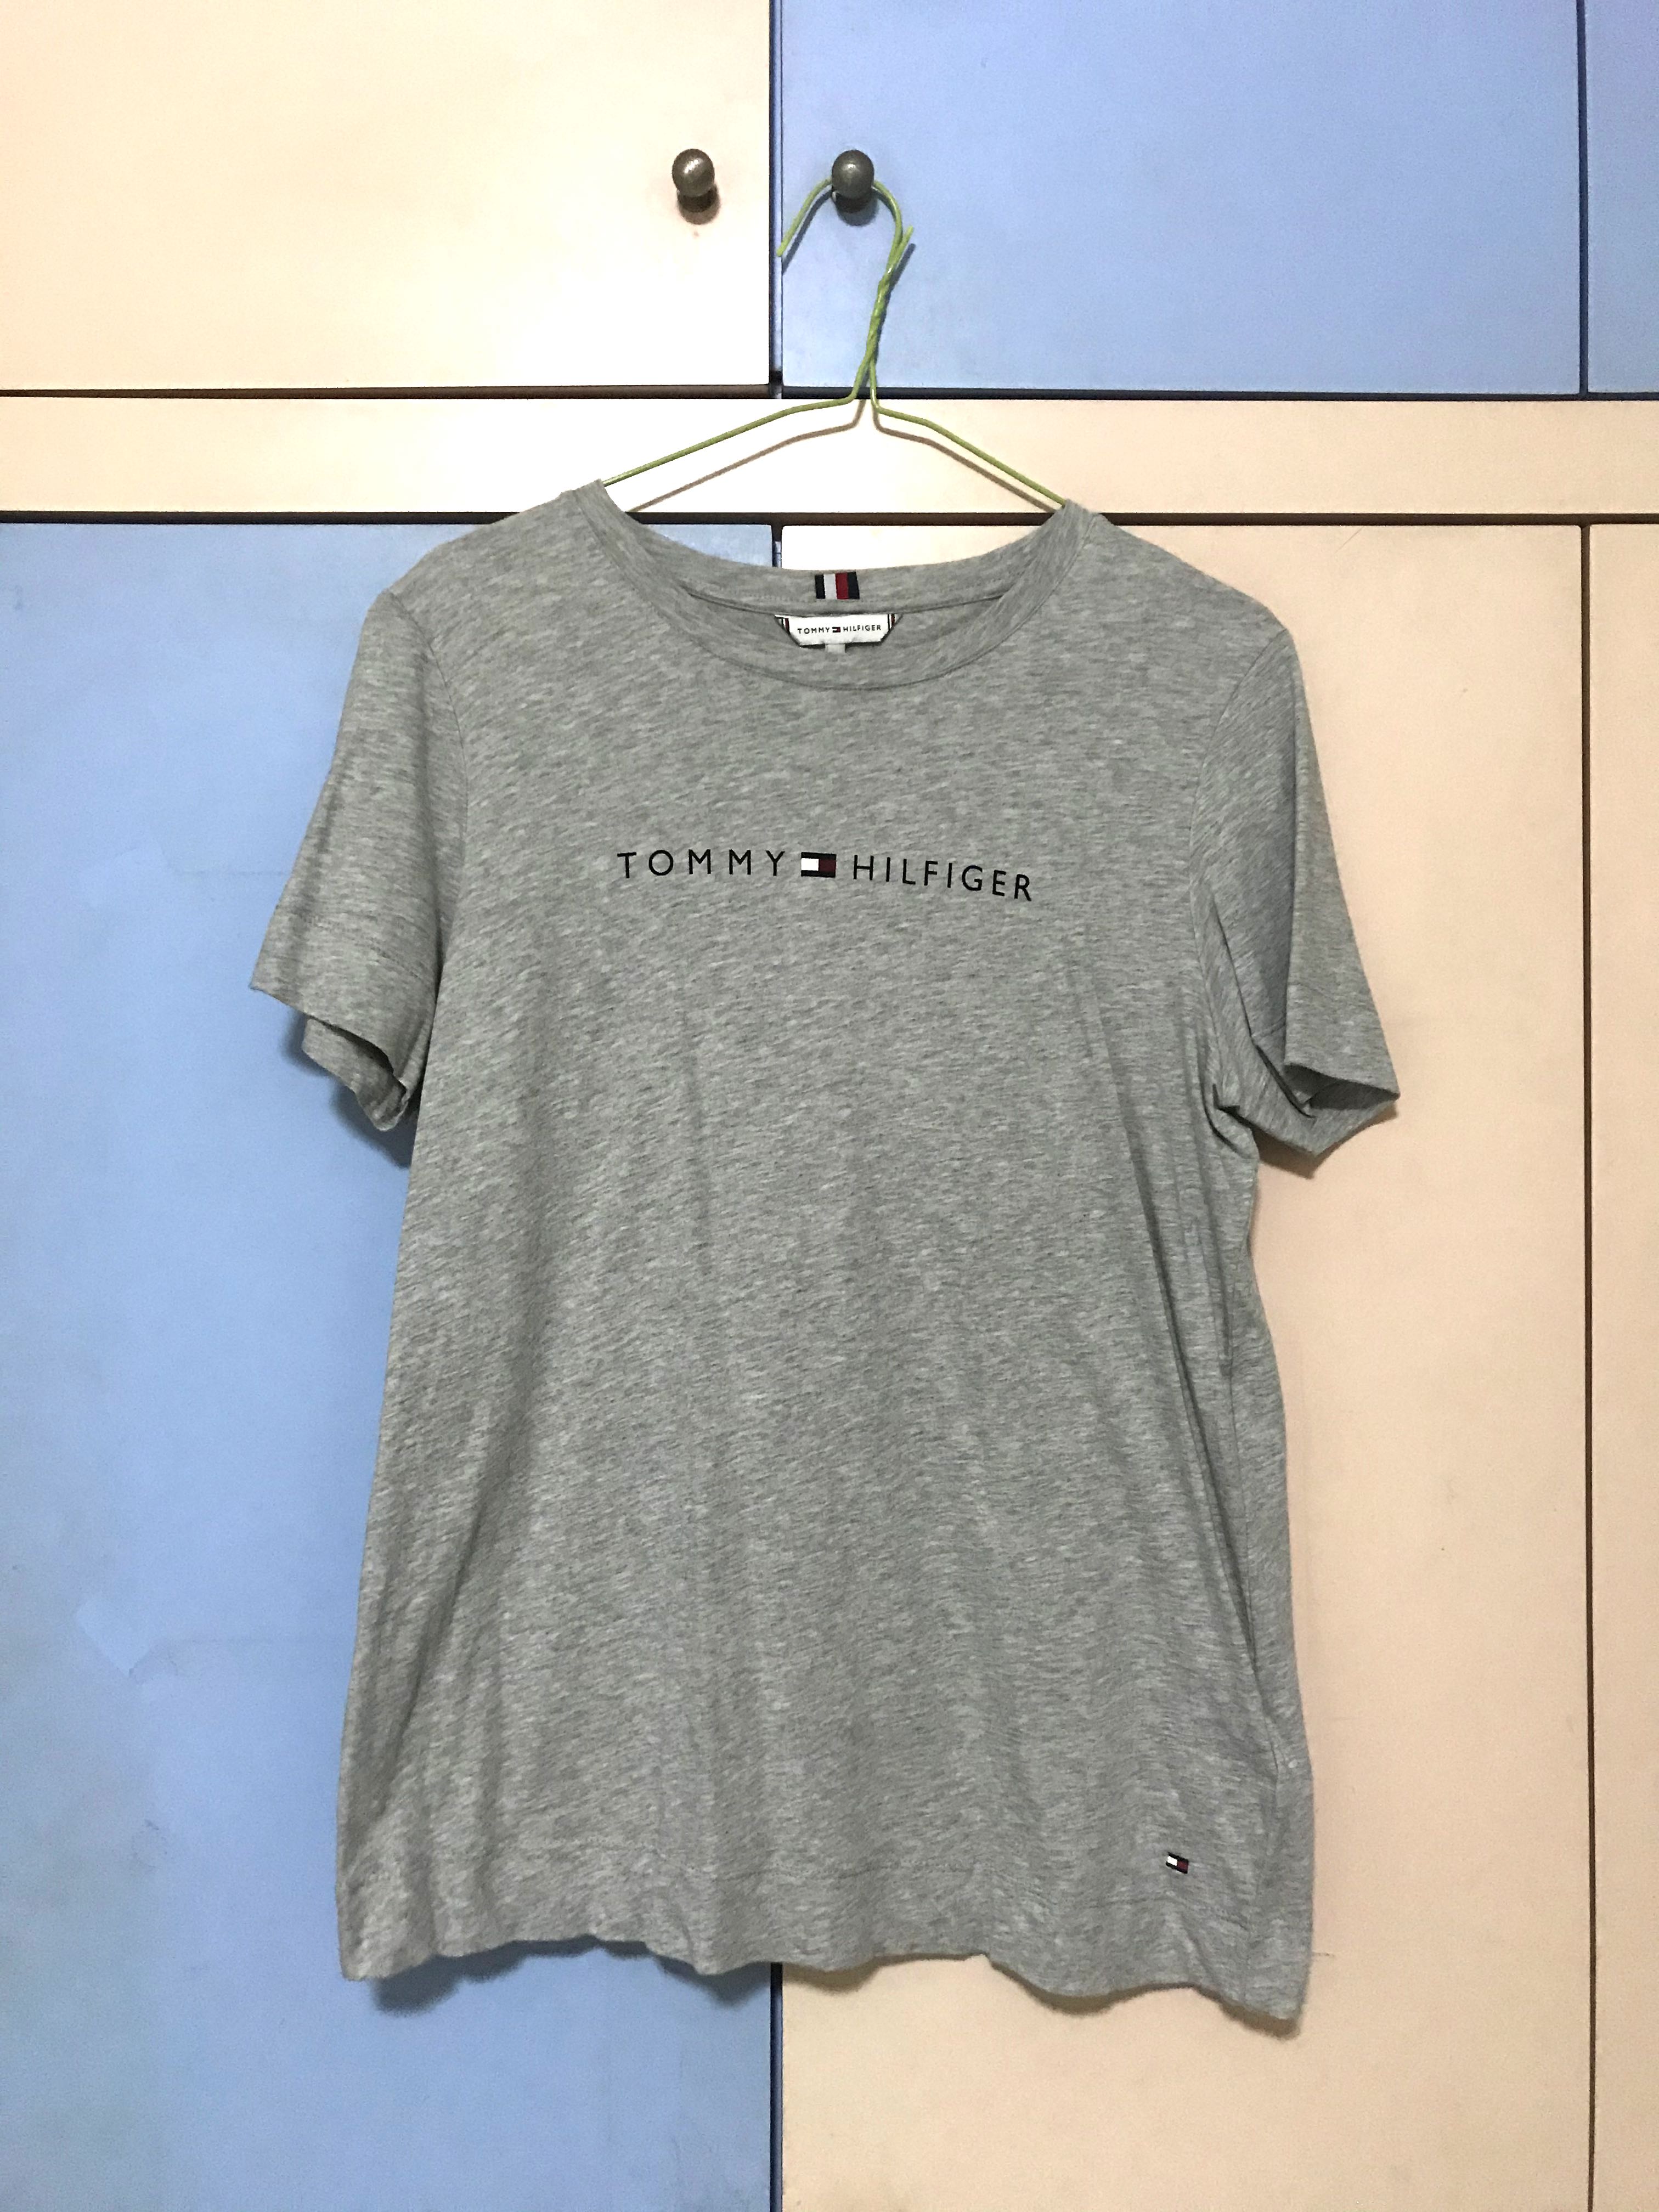 authentic tommy hilfiger shirt